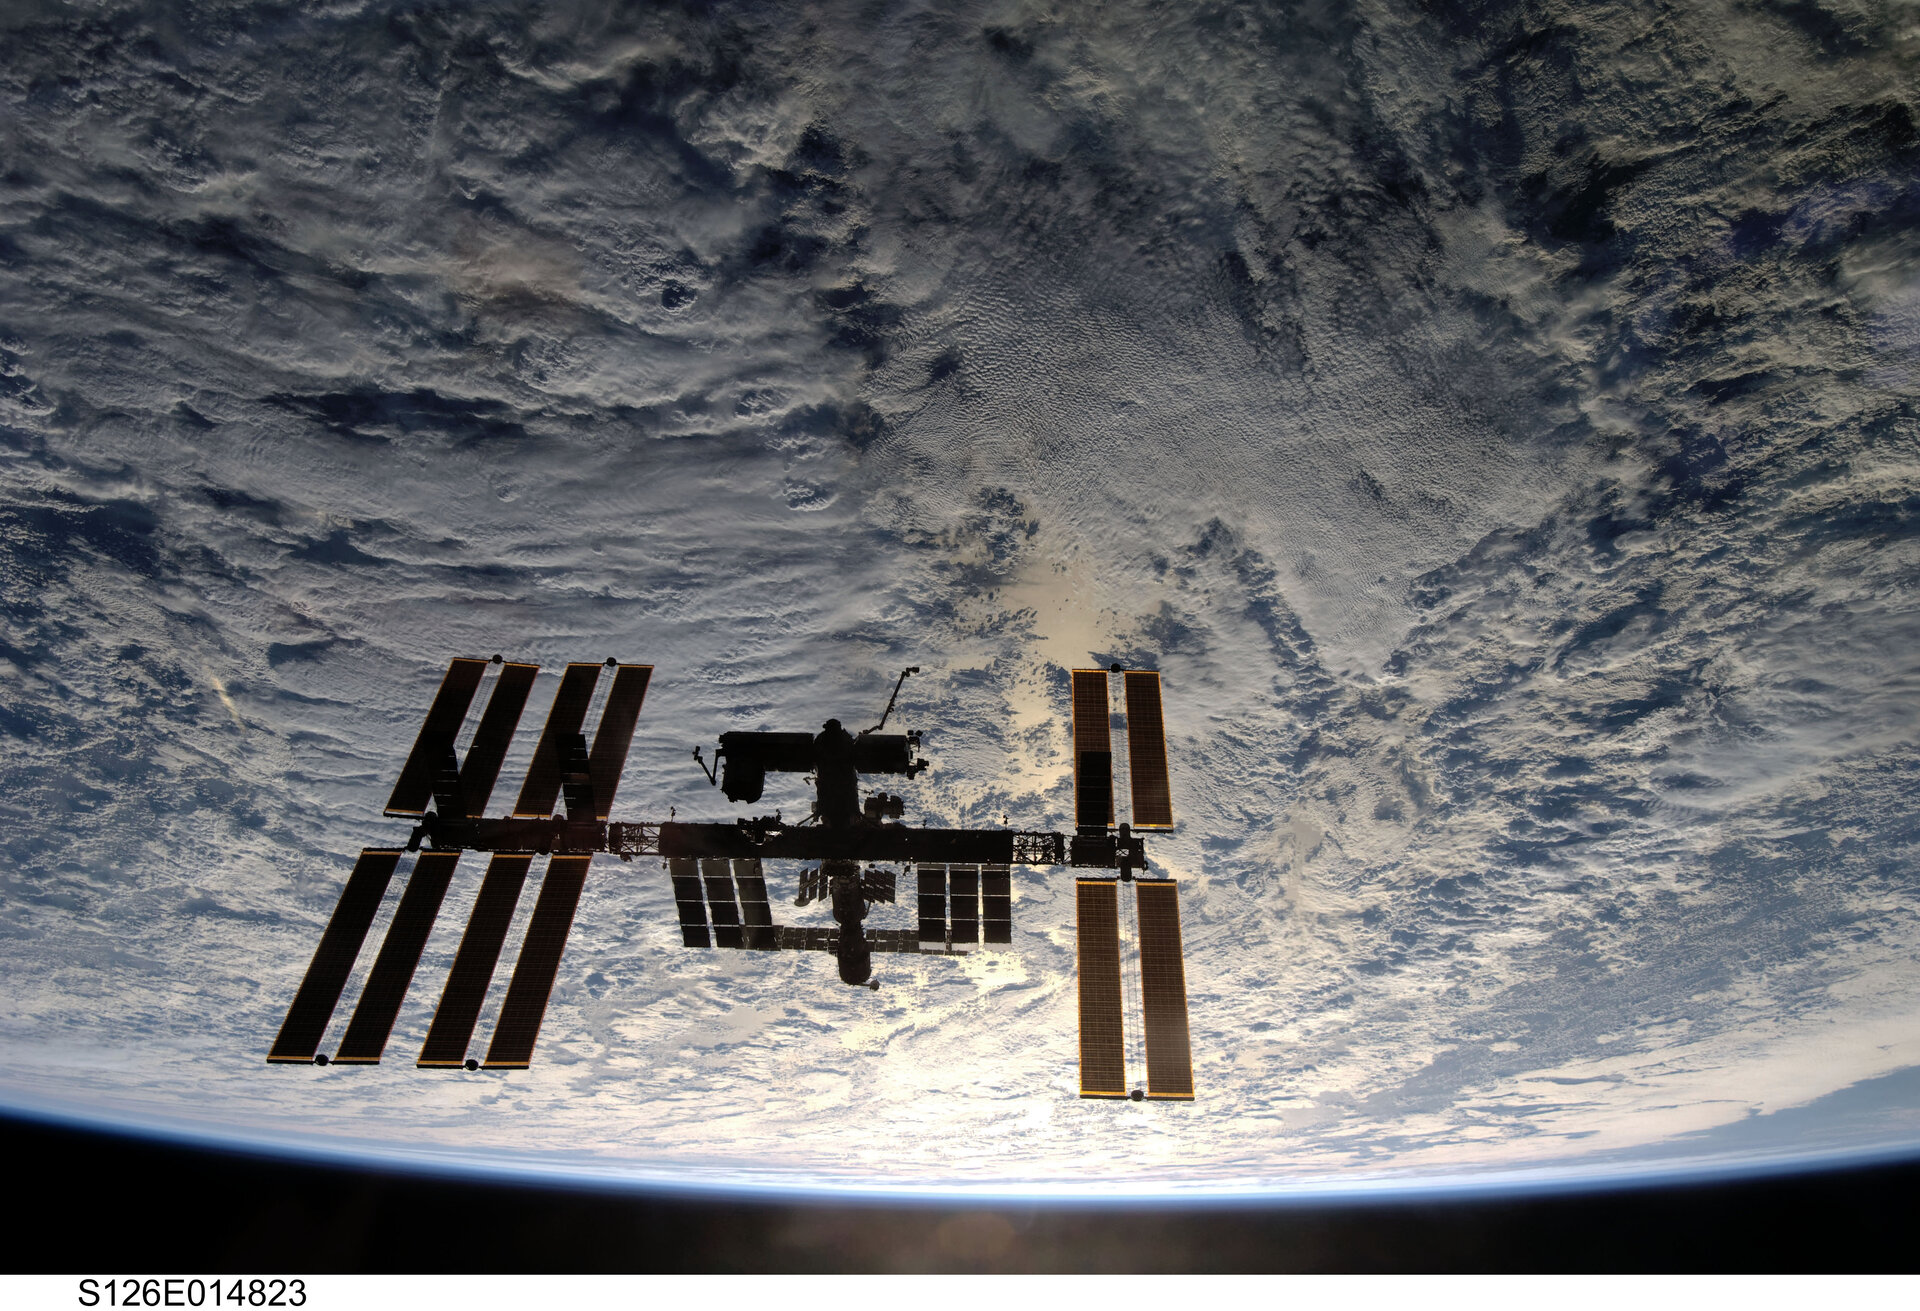 ISS viewed from Space Shuttle Endeavour